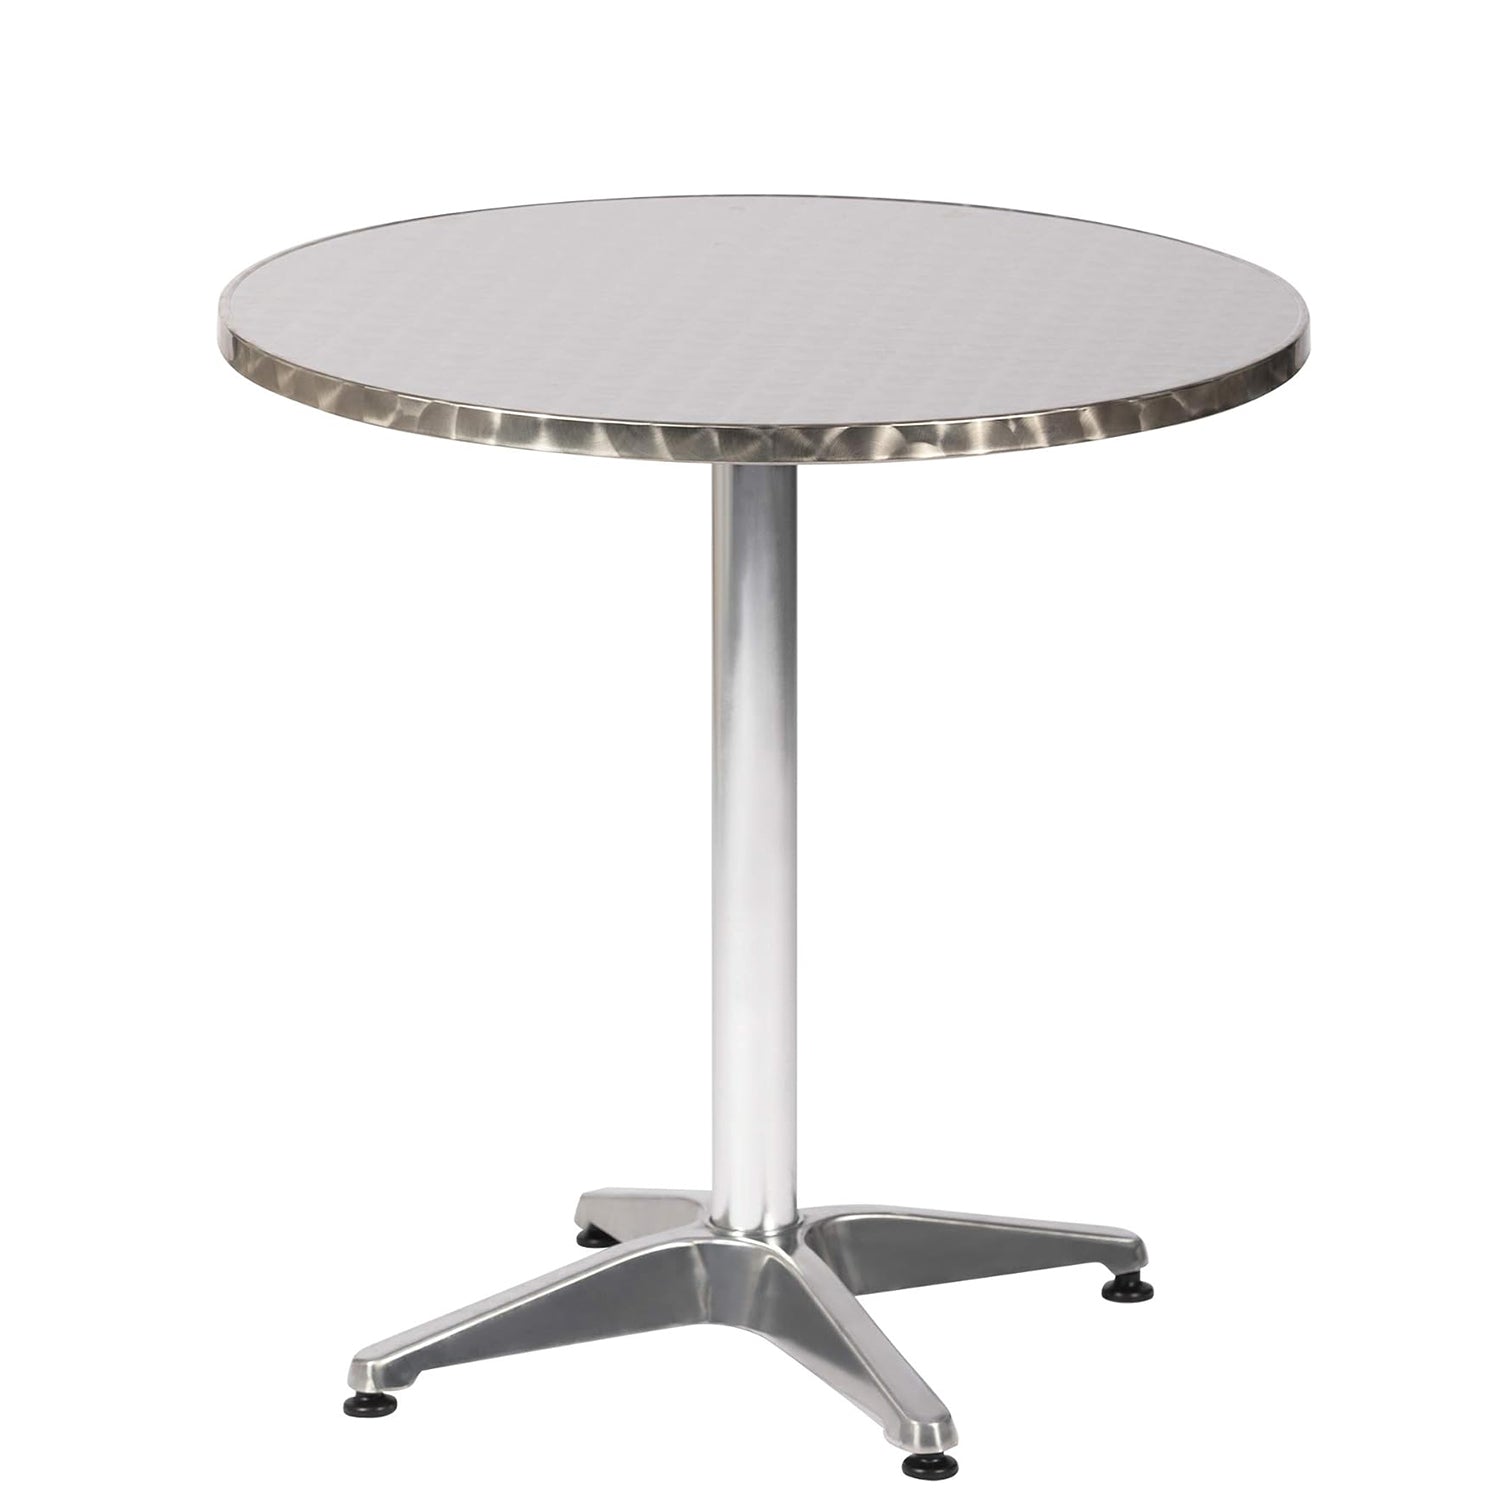 27.5" Round Outdoor Patio Aluminum Table Bistro End Table Backyard Side Table